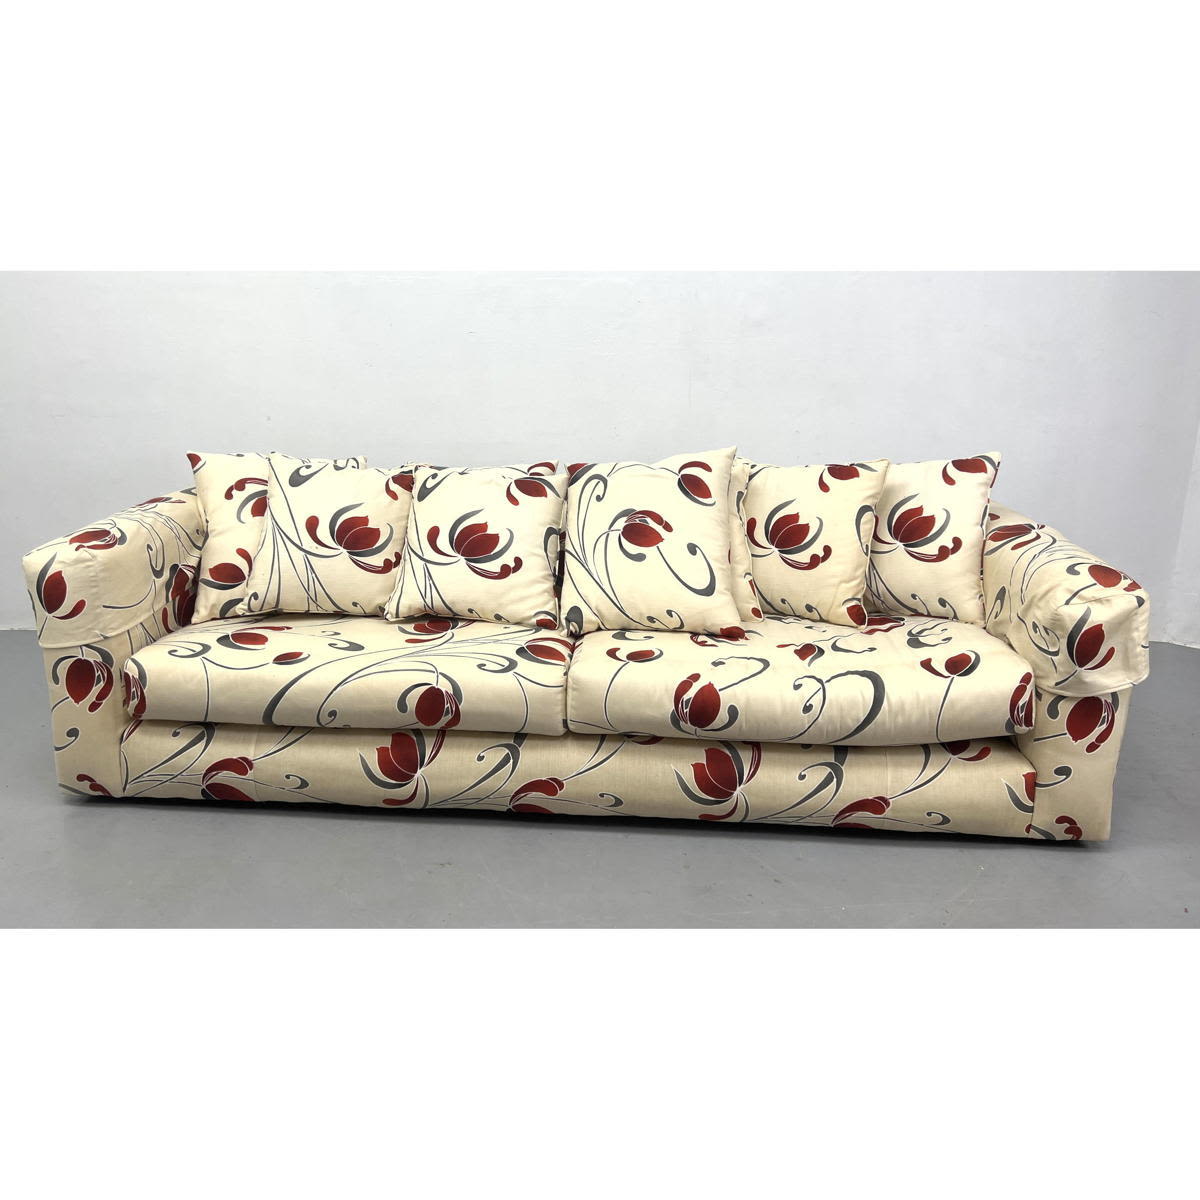 Upholstered Sofa Couch. 

Dimensions: